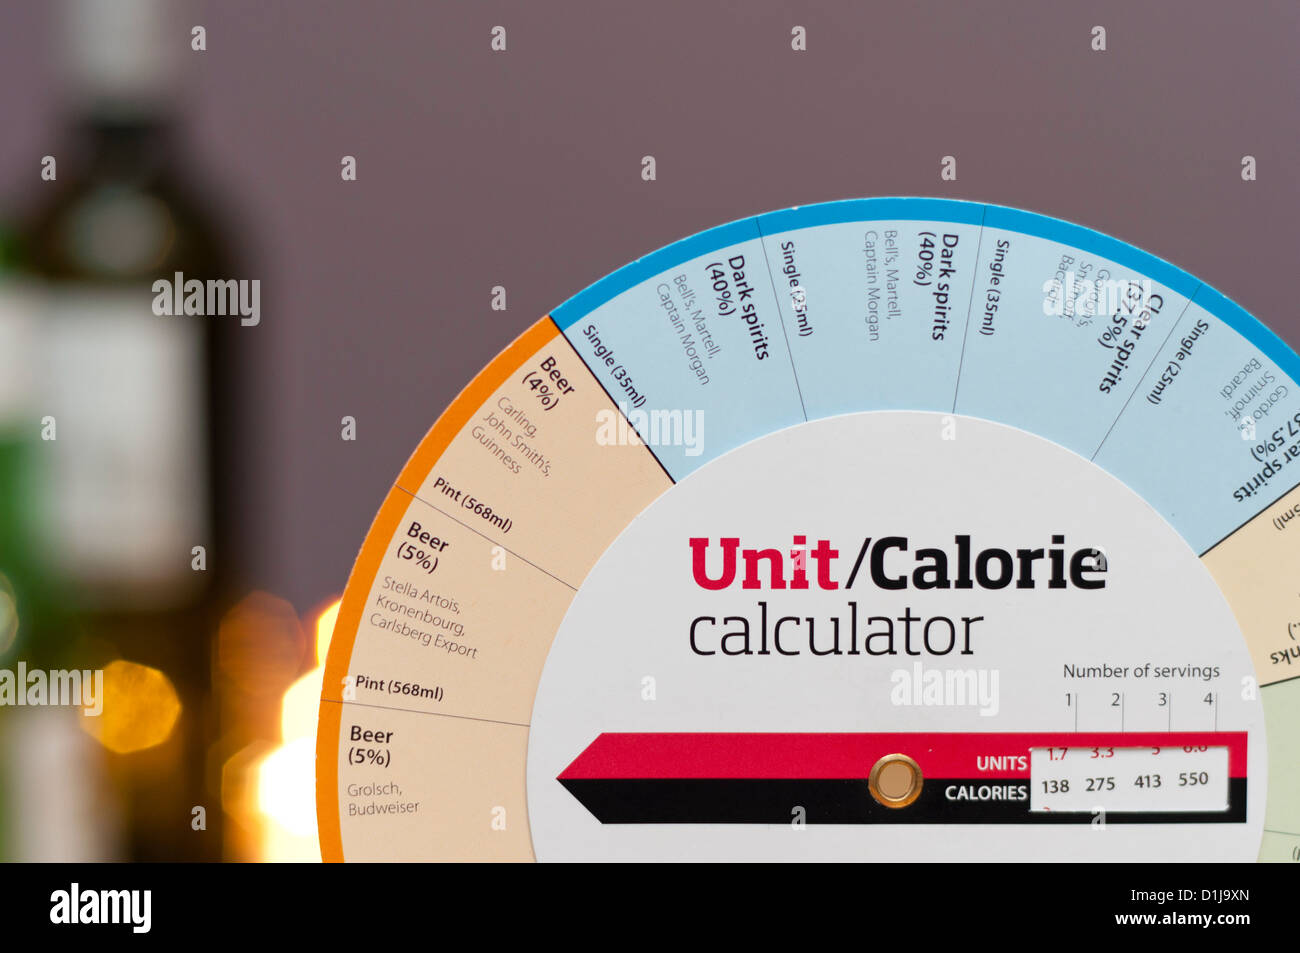 Alcohol units and calories calculator. Stock Photo